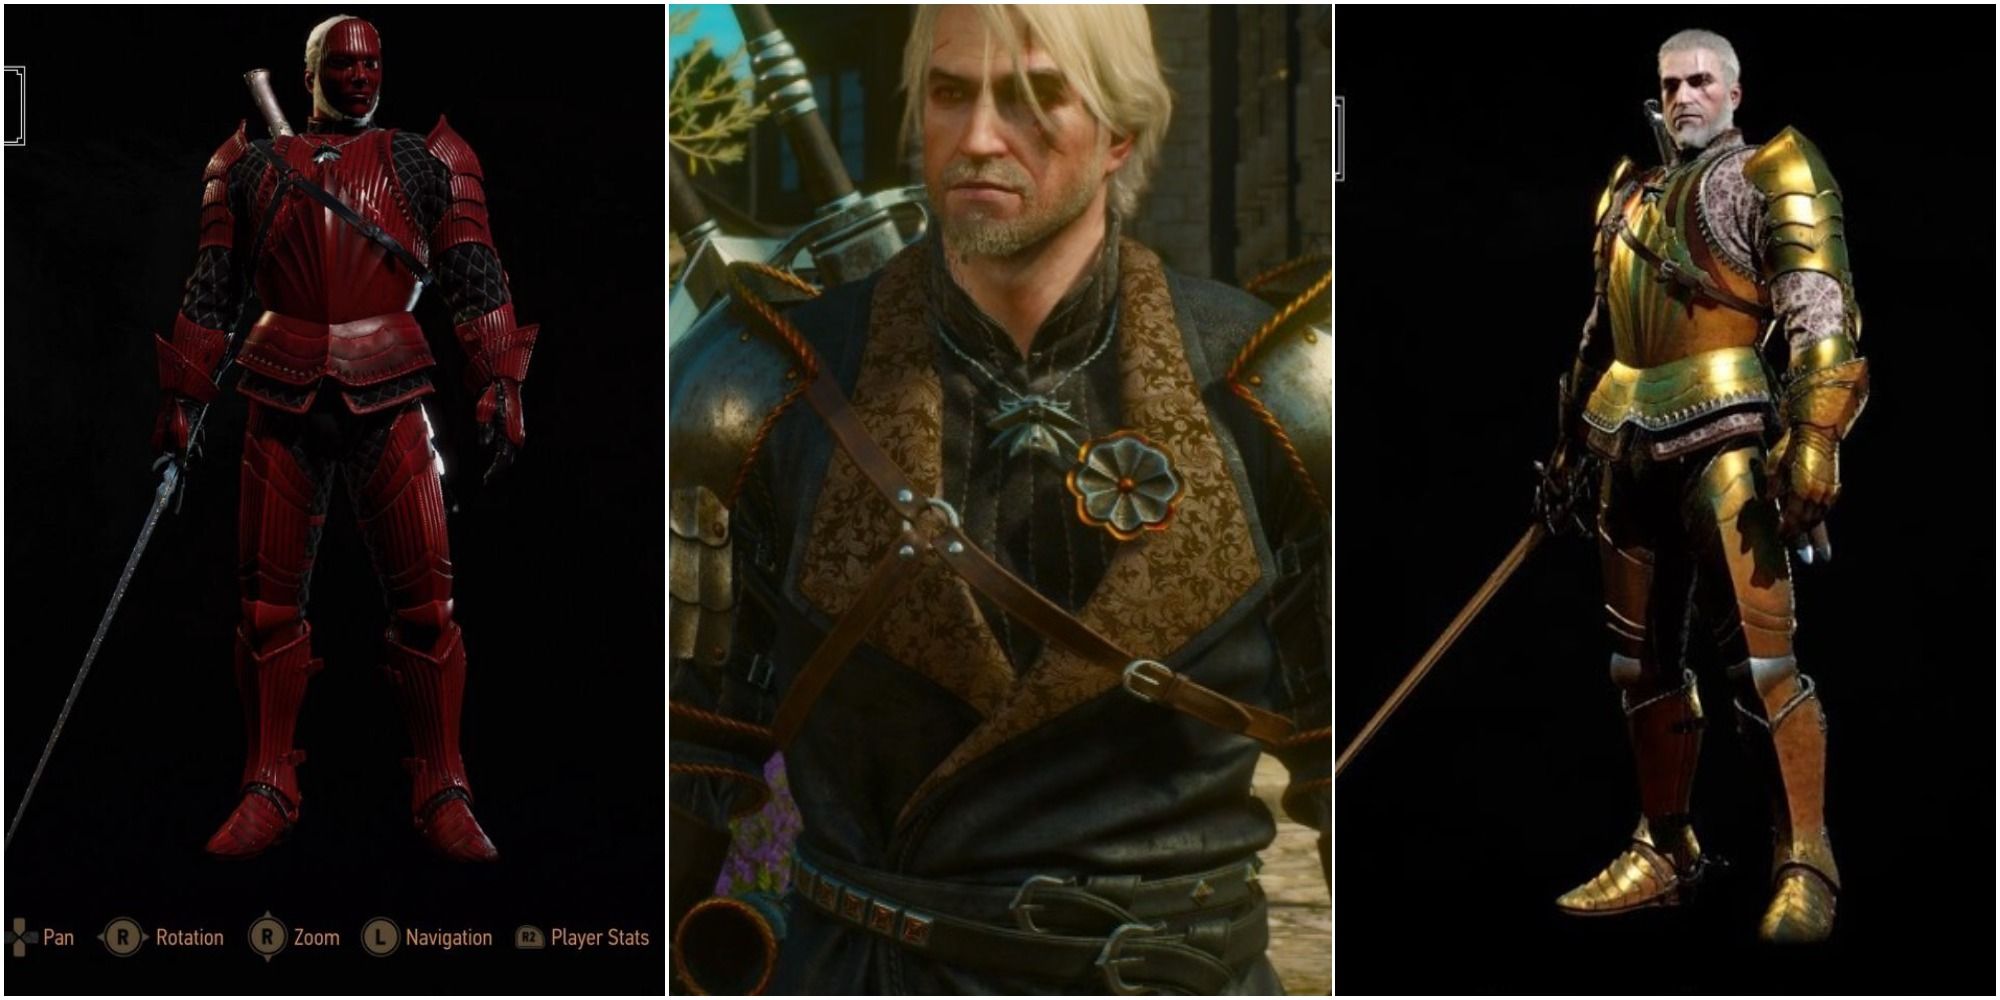 Hen Gaidth Armor, Ducal Guard Captain Armor and the Toussaint Armor from the Witcher 3 are some of the rarest sets in the game